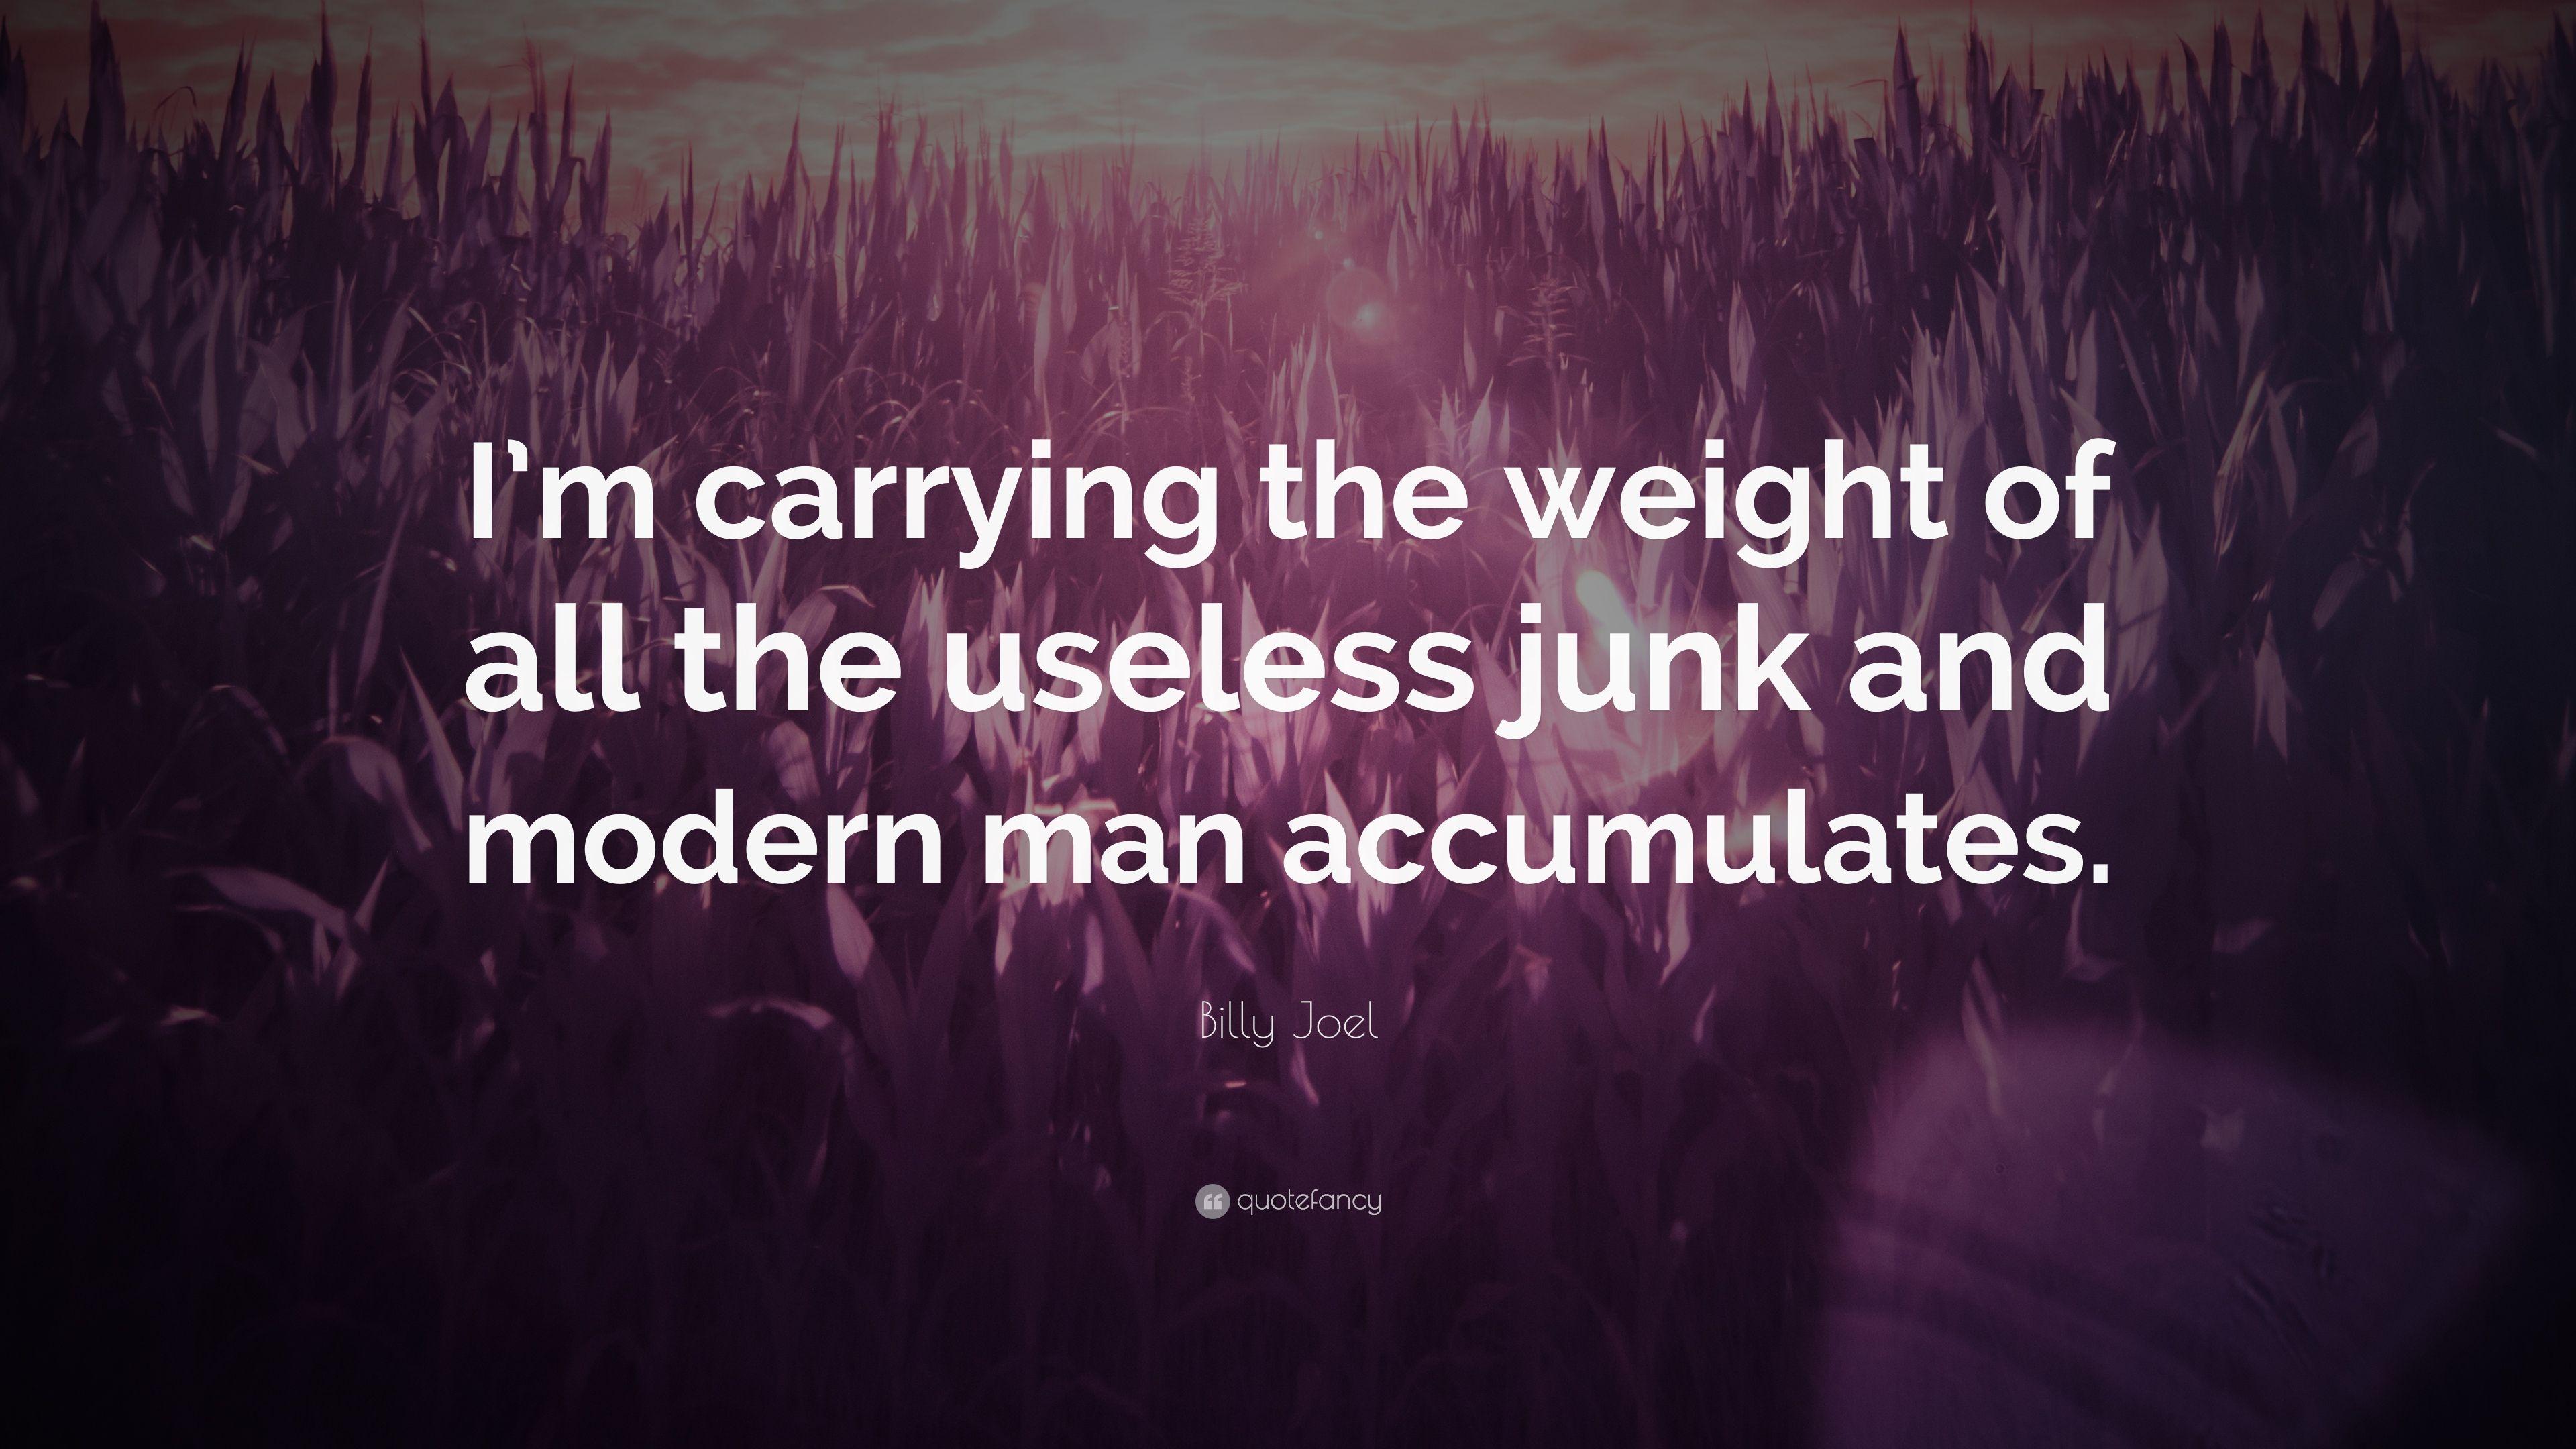 Billy Joel Quote: “I'm carrying the weight of all the useless junk